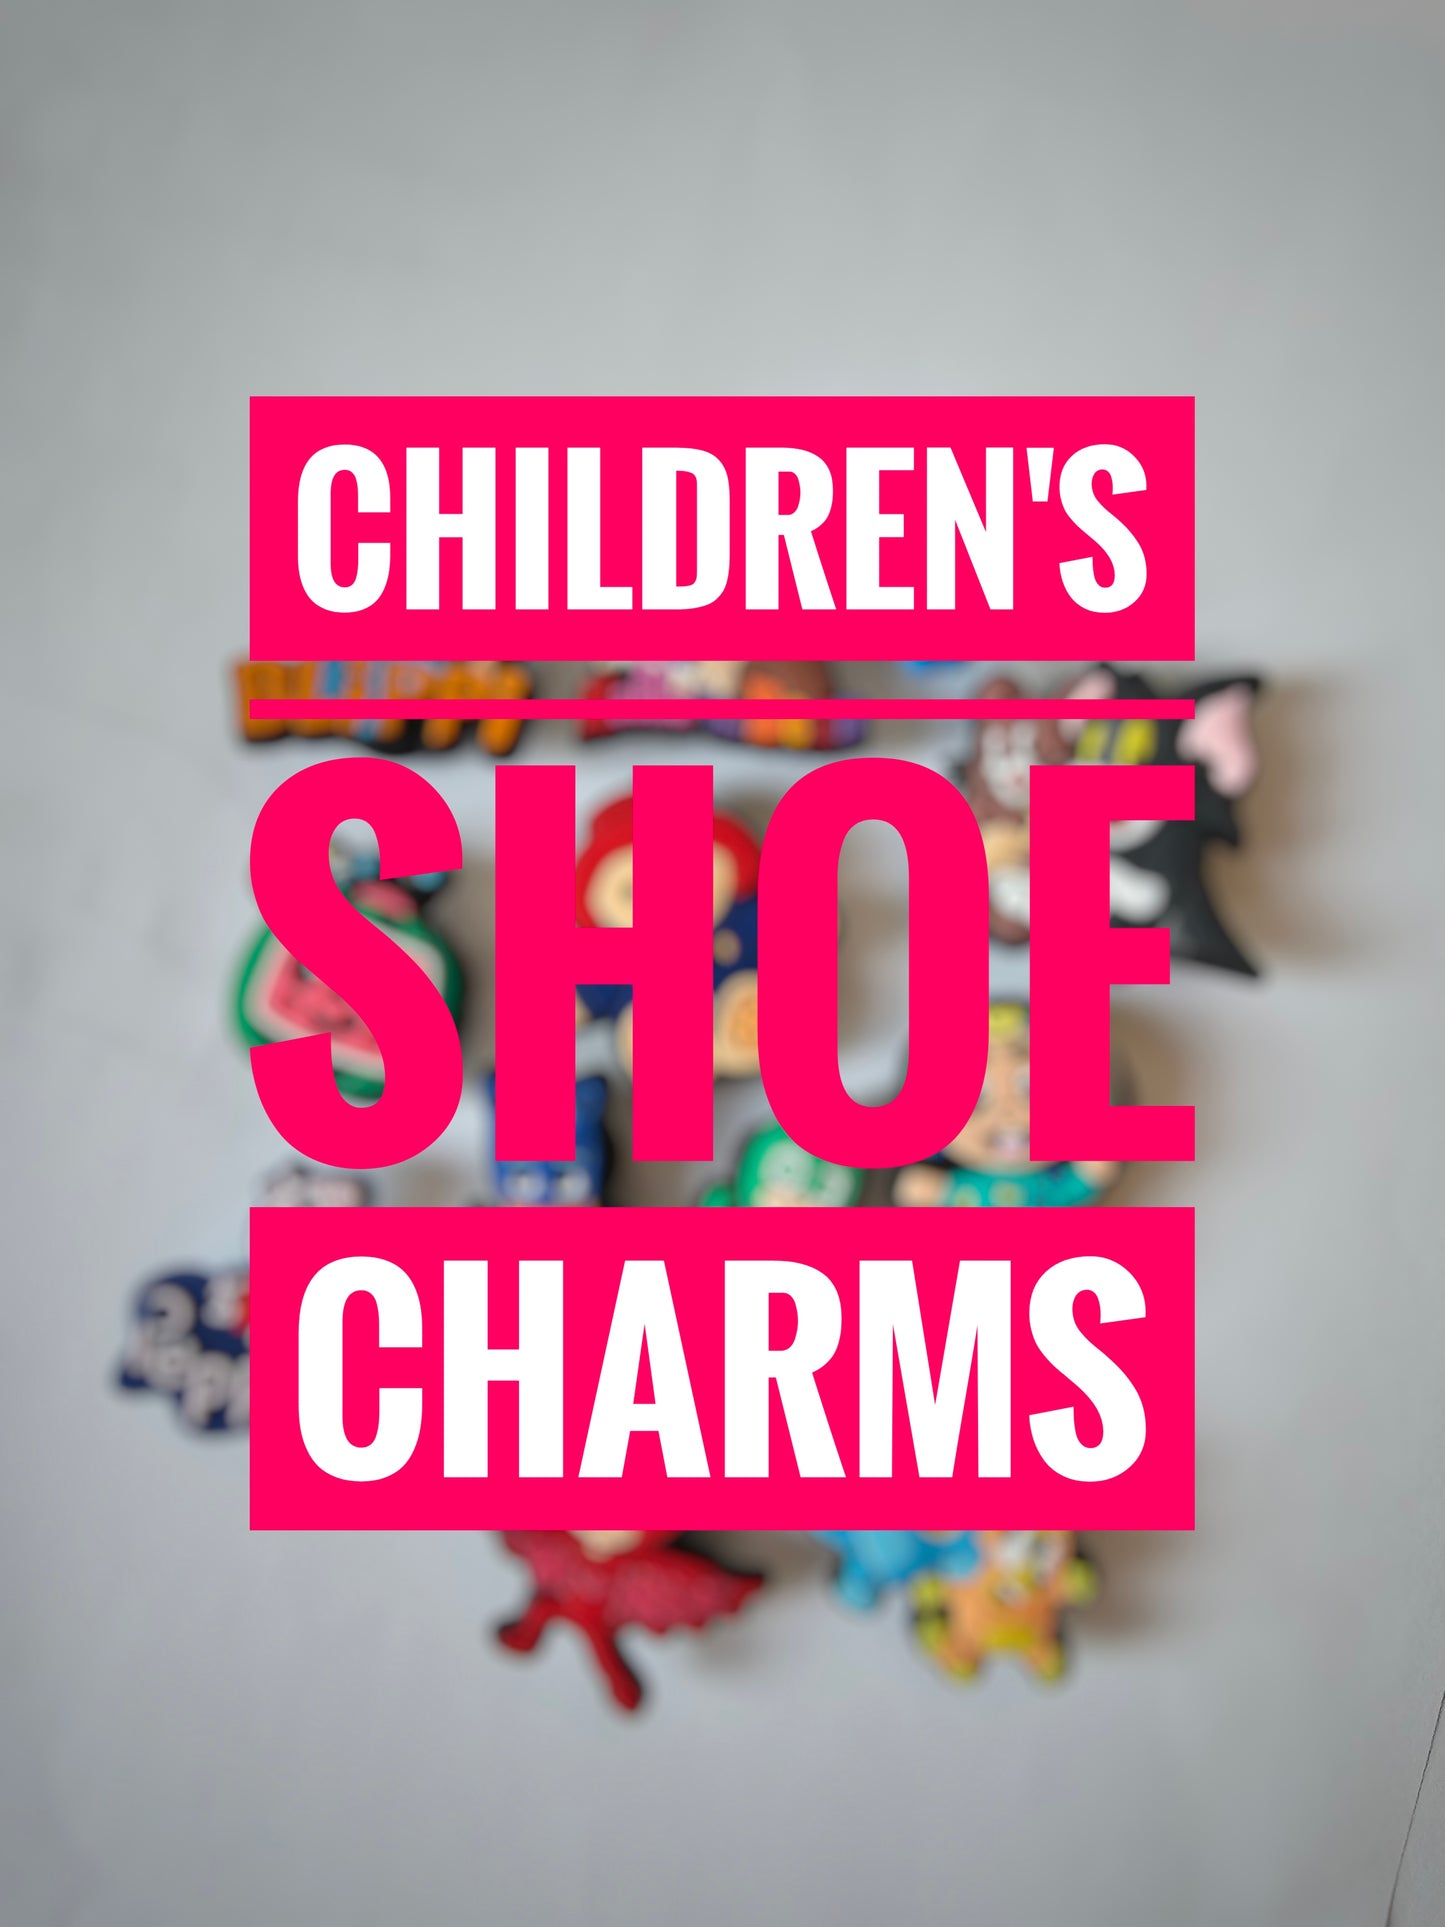 Children's style shoe charms